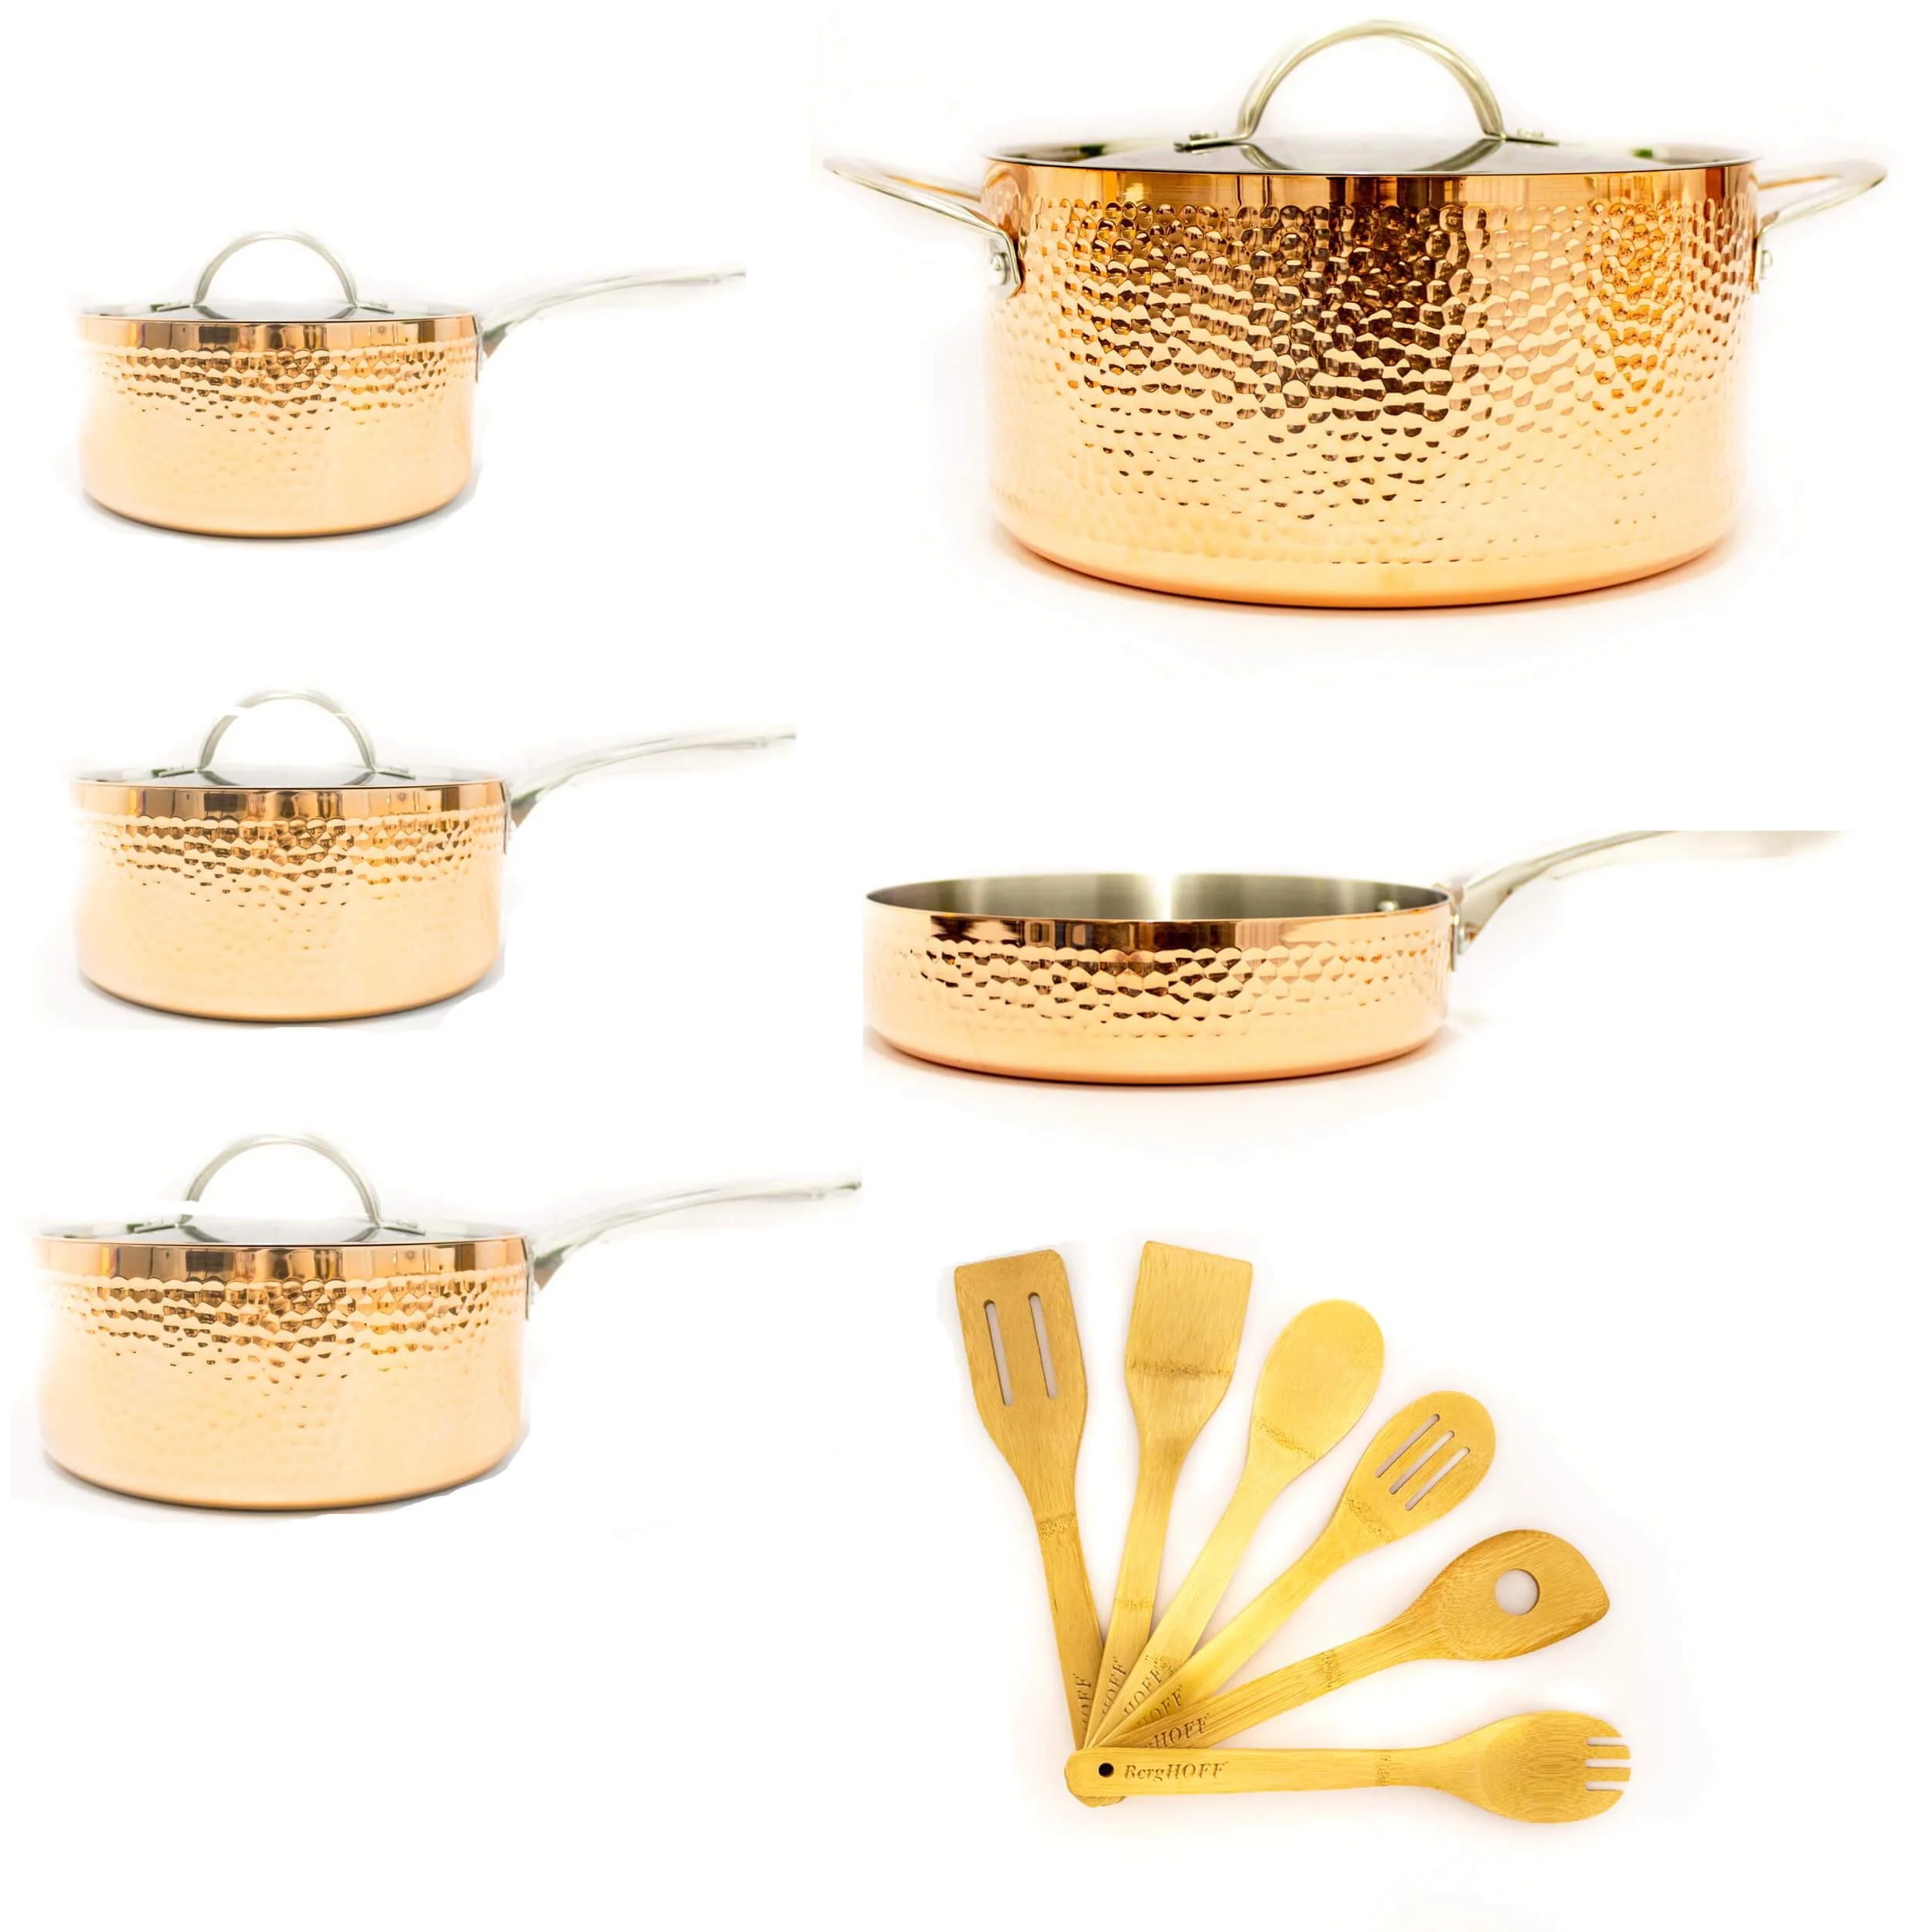 BergHOFF 10-Piece Copper Vintage Collection Polished Cookware Set 2212299 -  The Home Depot